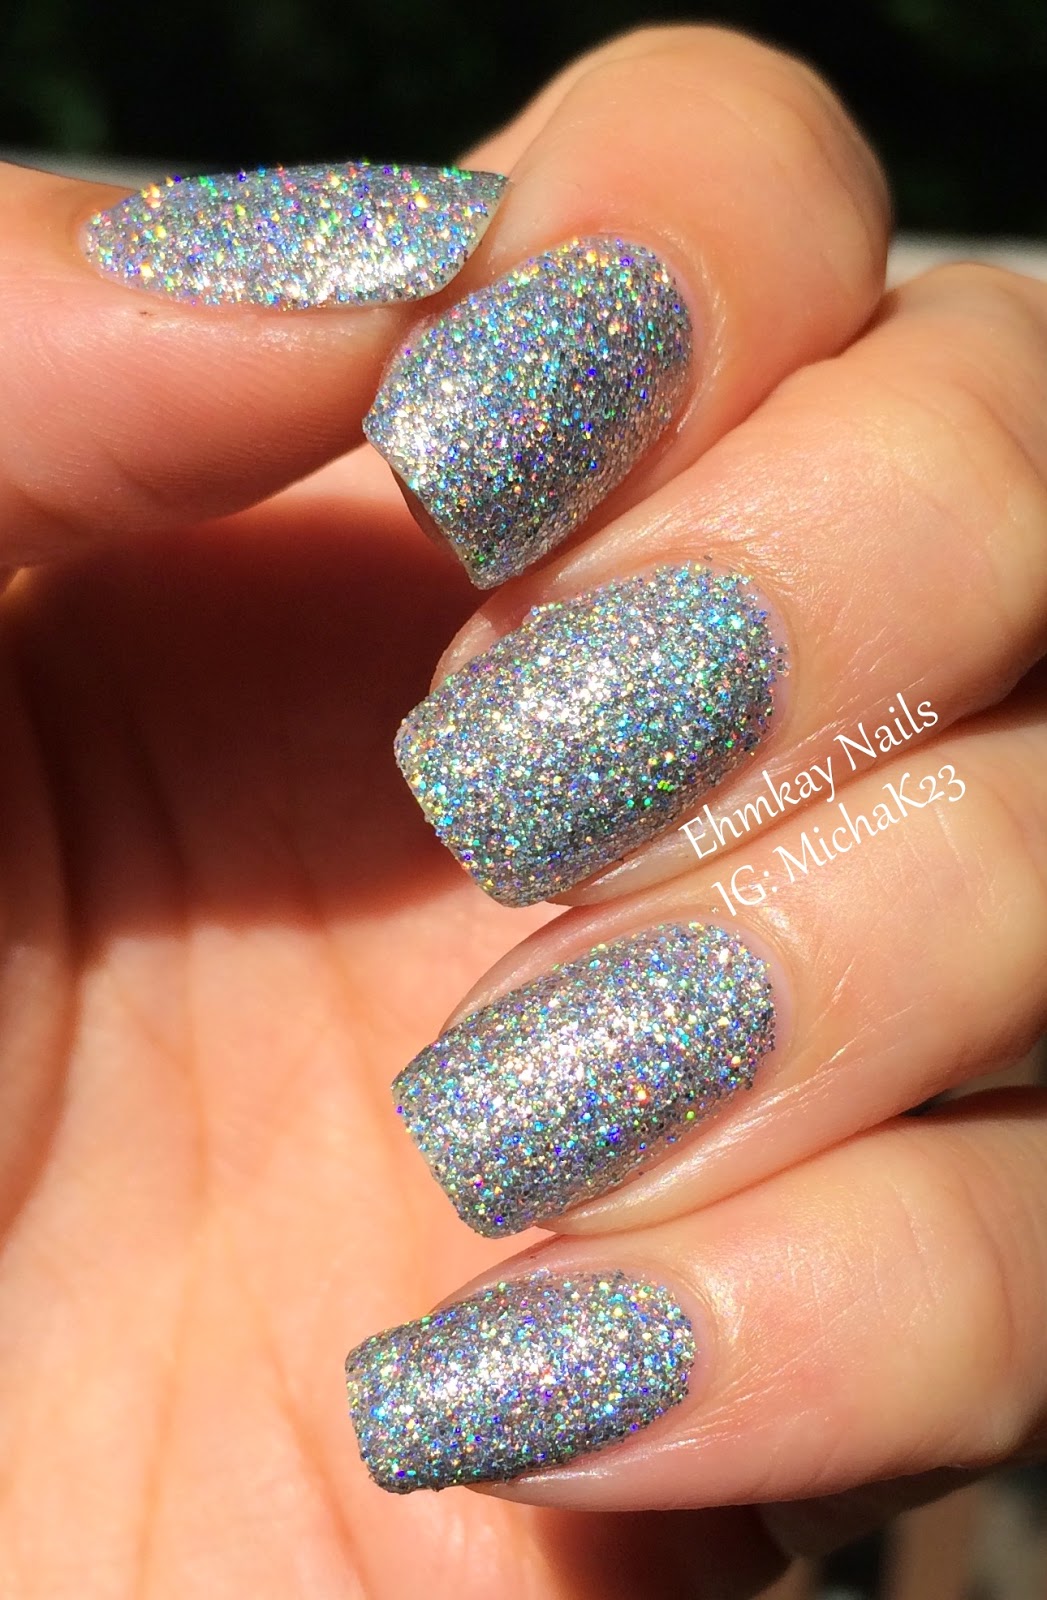 ehmkay nails: Different Dimension Cosmologically Speaking Swatches and ...